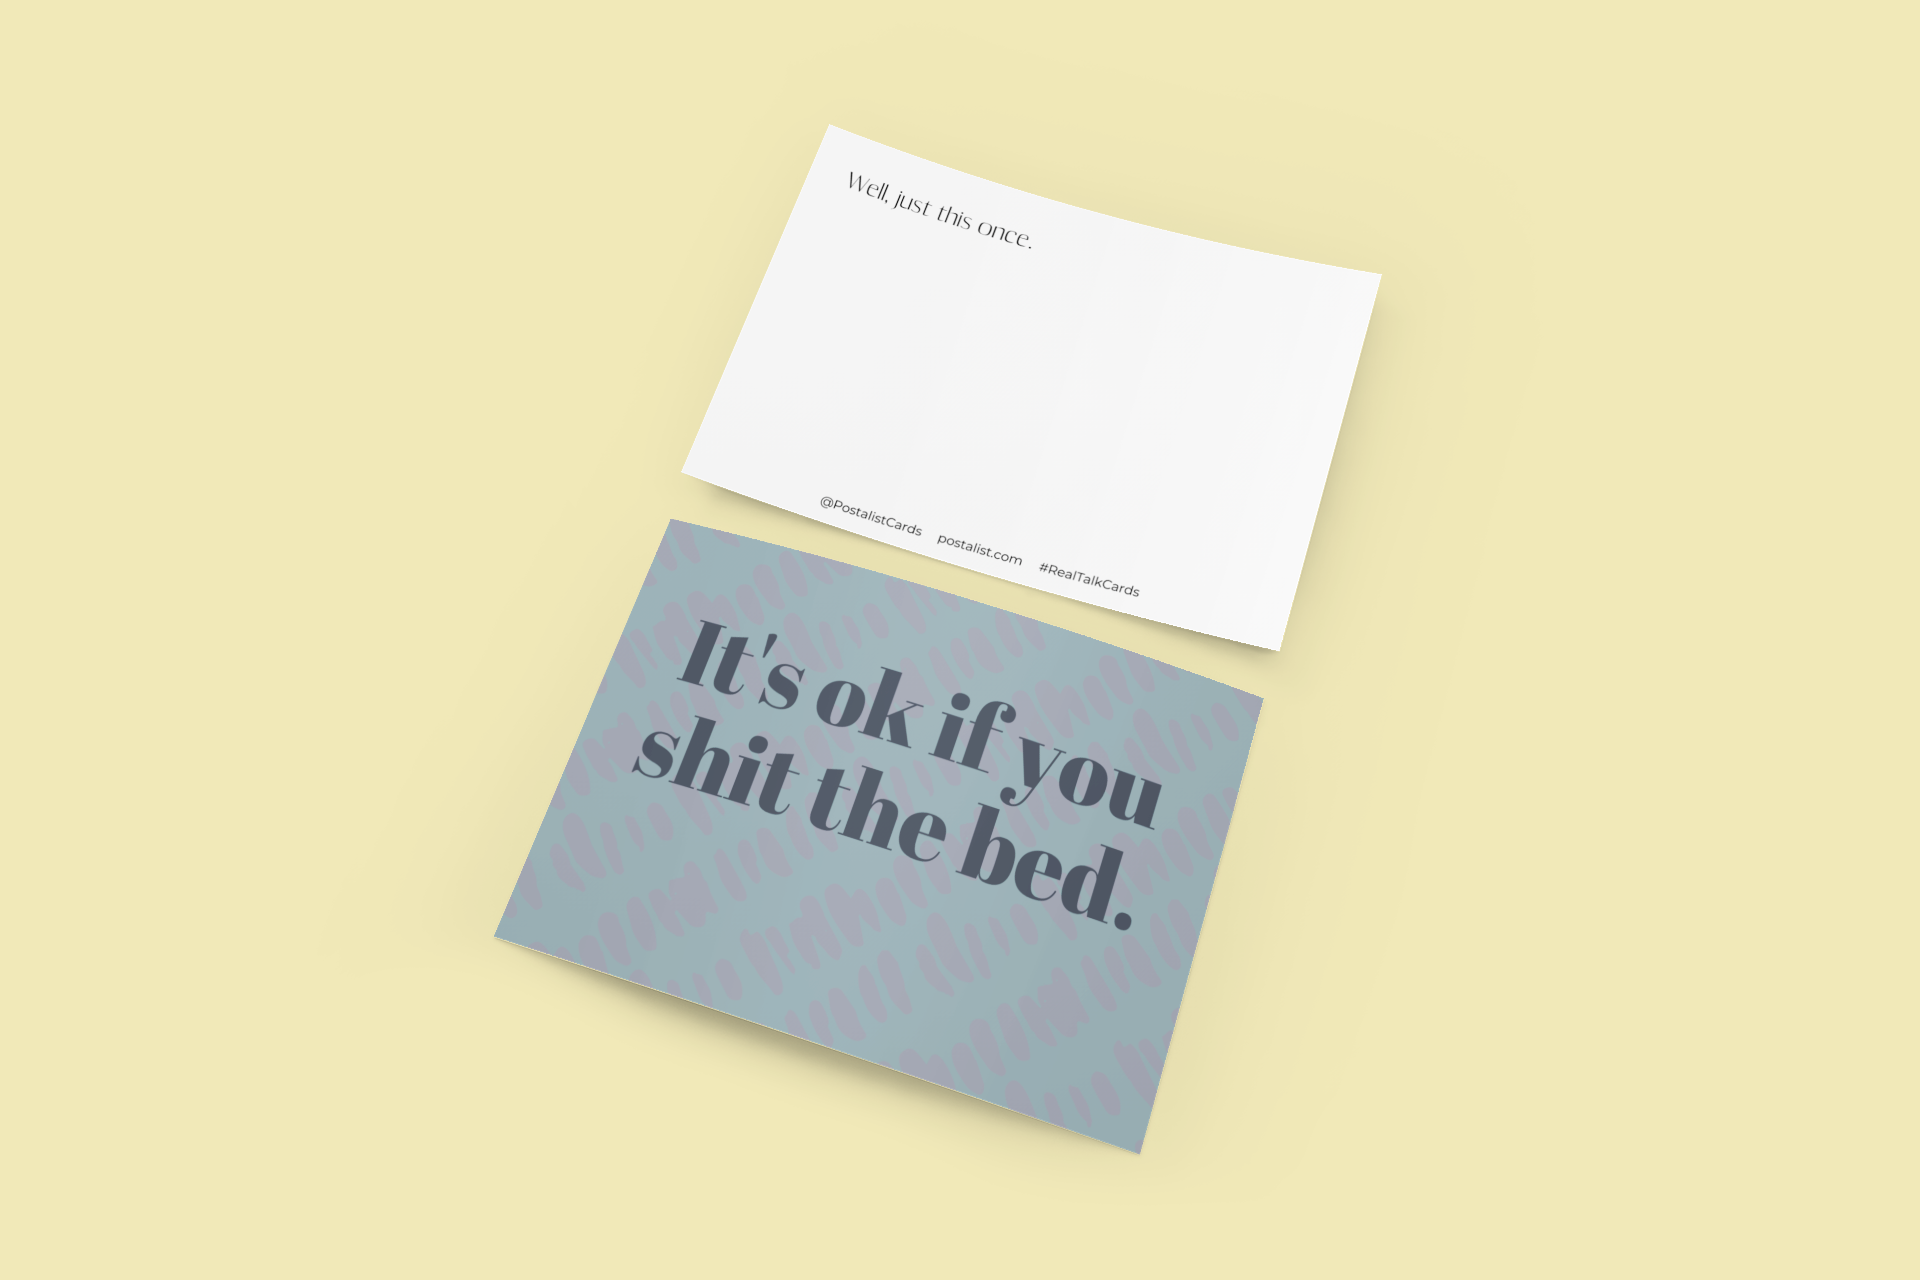 pregnancy cards - it's ok if you shit the bed